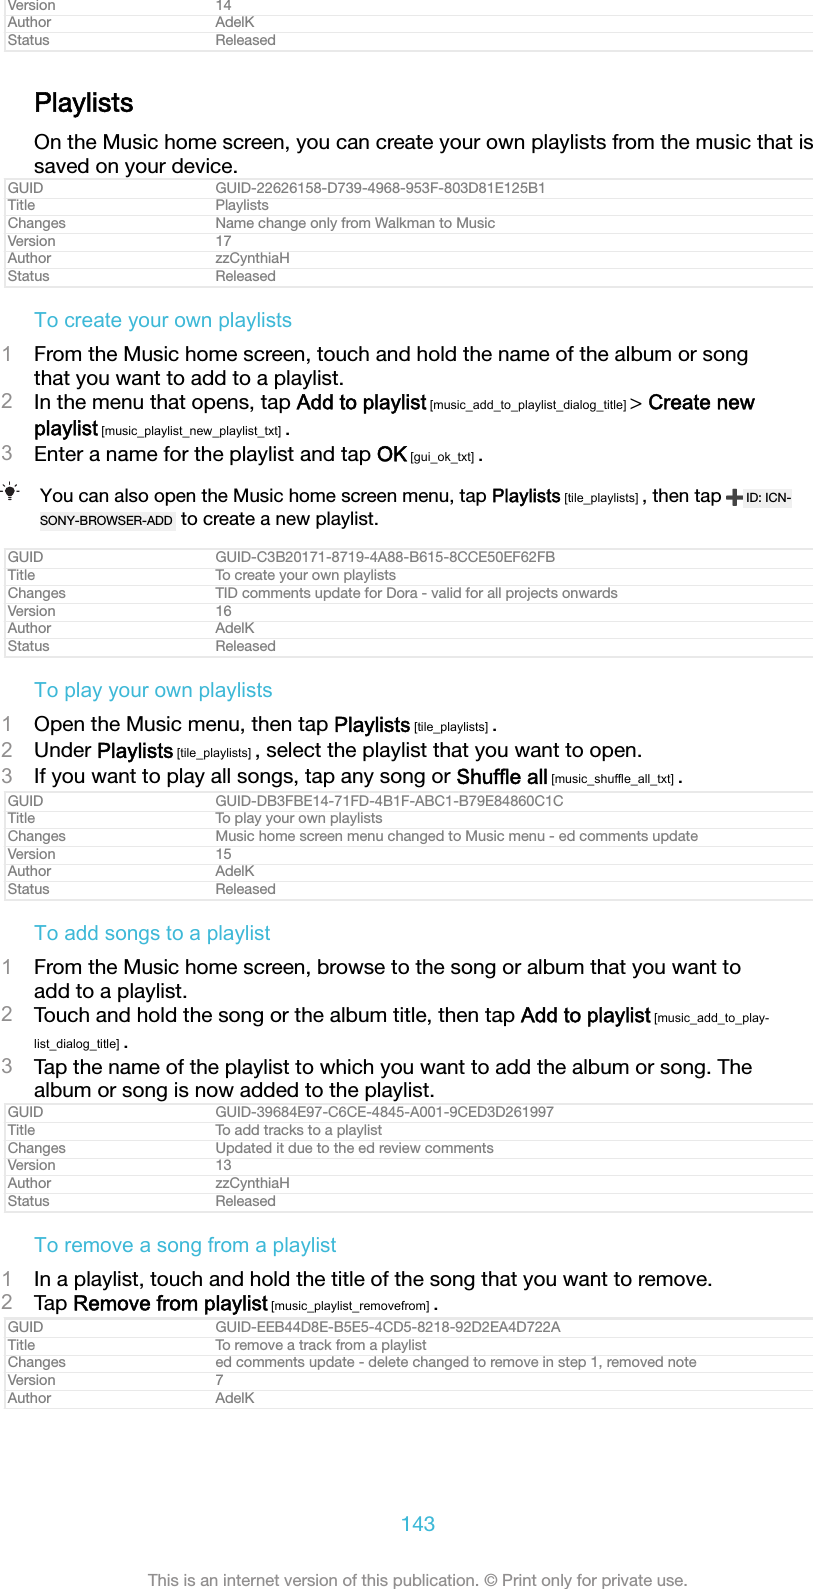 Version 14Author AdelKStatus ReleasedPlaylistsOn the Music home screen, you can create your own playlists from the music that issaved on your device.GUID GUID-22626158-D739-4968-953F-803D81E125B1Title PlaylistsChanges Name change only from Walkman to MusicVersion 17Author zzCynthiaHStatus ReleasedTo create your own playlists1From the Music home screen, touch and hold the name of the album or songthat you want to add to a playlist.2In the menu that opens, tap Add to playlist [music_add_to_playlist_dialog_title] &gt; Create newplaylist [music_playlist_new_playlist_txt] .3Enter a name for the playlist and tap OK [gui_ok_txt] .You can also open the Music home screen menu, tap Playlists [tile_playlists] , then tap  ID: ICN-SONY-BROWSER-ADD  to create a new playlist.GUID GUID-C3B20171-8719-4A88-B615-8CCE50EF62FBTitle To create your own playlistsChanges TID comments update for Dora - valid for all projects onwardsVersion 16Author AdelKStatus ReleasedTo play your own playlists1Open the Music menu, then tap Playlists [tile_playlists] .2Under Playlists [tile_playlists] , select the playlist that you want to open.3If you want to play all songs, tap any song or Shuffle all [music_shuffle_all_txt] .GUID GUID-DB3FBE14-71FD-4B1F-ABC1-B79E84860C1CTitle To play your own playlistsChanges Music home screen menu changed to Music menu - ed comments updateVersion 15Author AdelKStatus ReleasedTo add songs to a playlist1From the Music home screen, browse to the song or album that you want toadd to a playlist.2Touch and hold the song or the album title, then tap Add to playlist [music_add_to_play-list_dialog_title] .3Tap the name of the playlist to which you want to add the album or song. Thealbum or song is now added to the playlist.GUID GUID-39684E97-C6CE-4845-A001-9CED3D261997Title To add tracks to a playlistChanges Updated it due to the ed review commentsVersion 13Author zzCynthiaHStatus ReleasedTo remove a song from a playlist1In a playlist, touch and hold the title of the song that you want to remove.2Tap Remove from playlist [music_playlist_removefrom] .GUID GUID-EEB44D8E-B5E5-4CD5-8218-92D2EA4D722ATitle To remove a track from a playlistChanges ed comments update - delete changed to remove in step 1, removed noteVersion 7Author AdelK143This is an internet version of this publication. © Print only for private use.